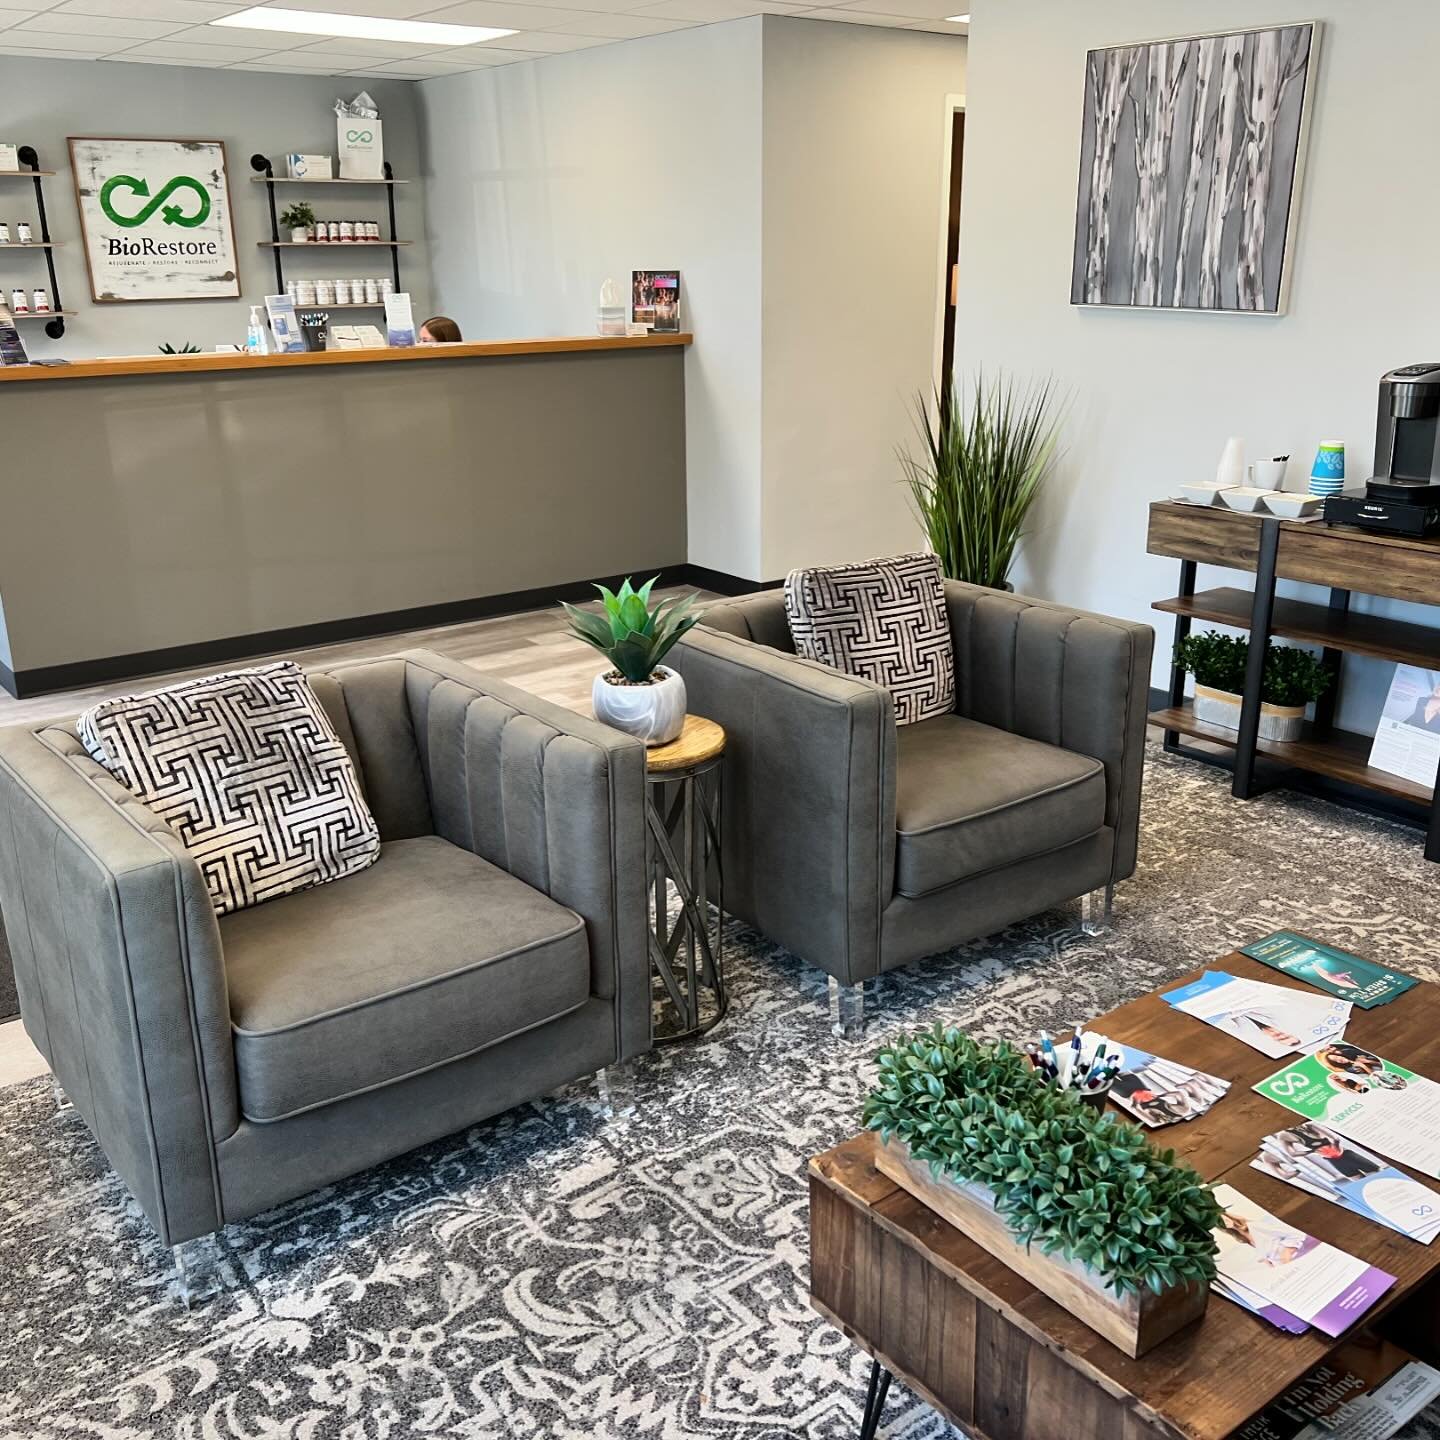 Have you heard of BioRestore in Newtown?  If you are looking to expand your wellness journey, you need to check them out! 

@biorestorehealth is a unique health partner providing one-on-one support necessary to pinpoint what you need to rejuvenate, r